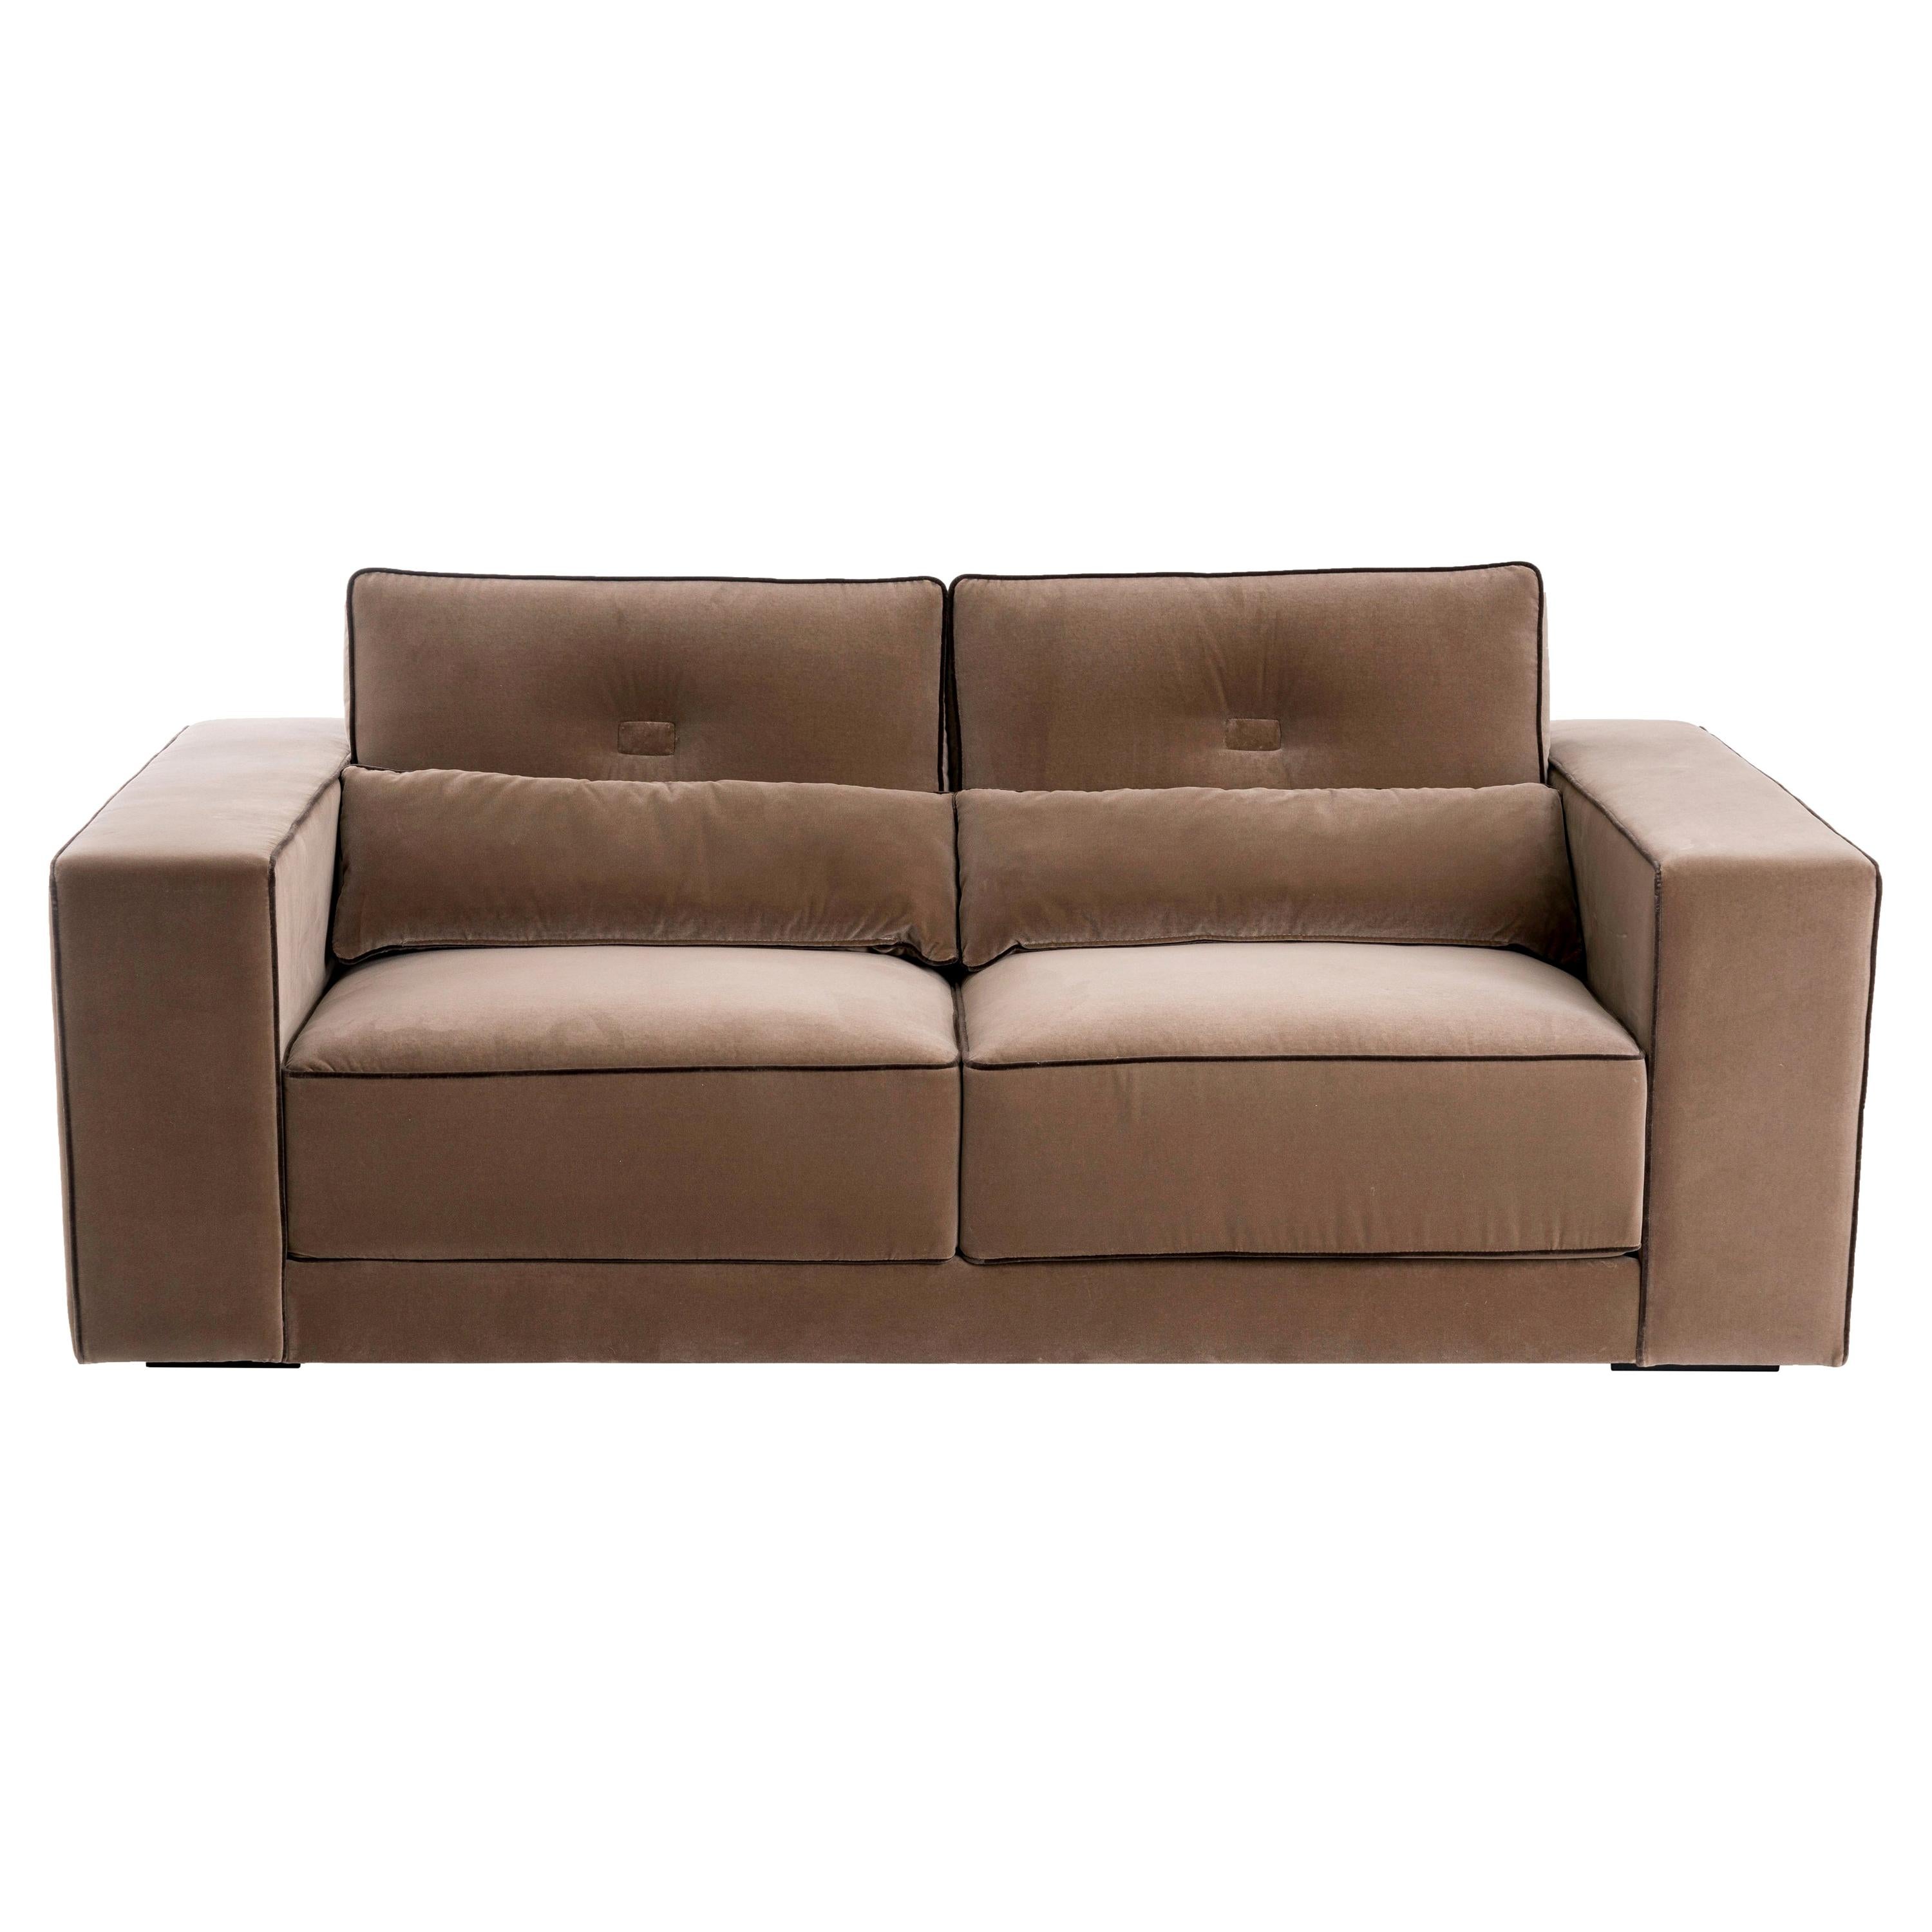 Brown Capricho Midcentury Design Sofa with Contrasting Piping Details